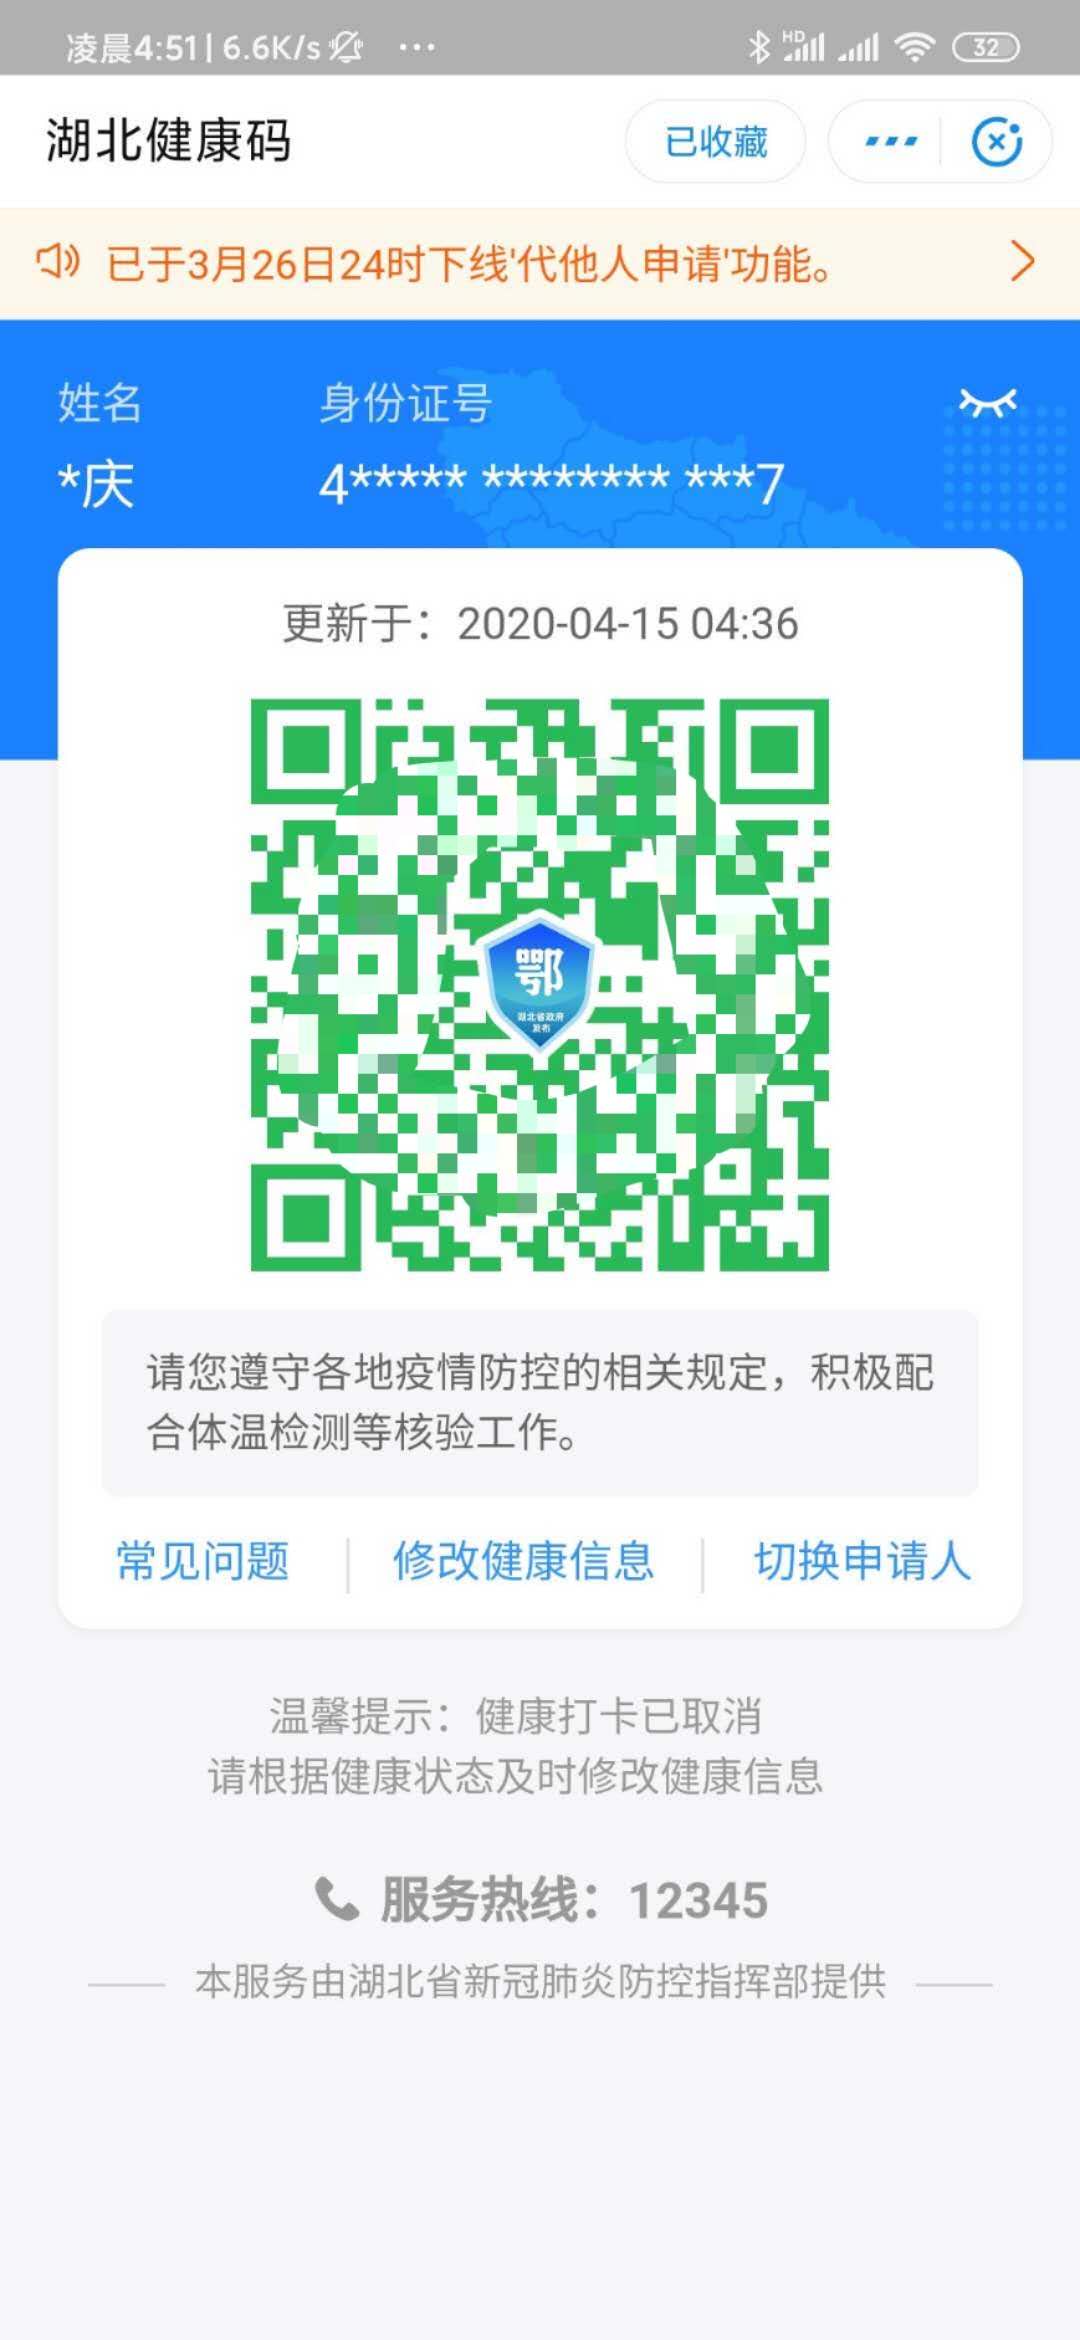 Personal QR code in Wuhan China